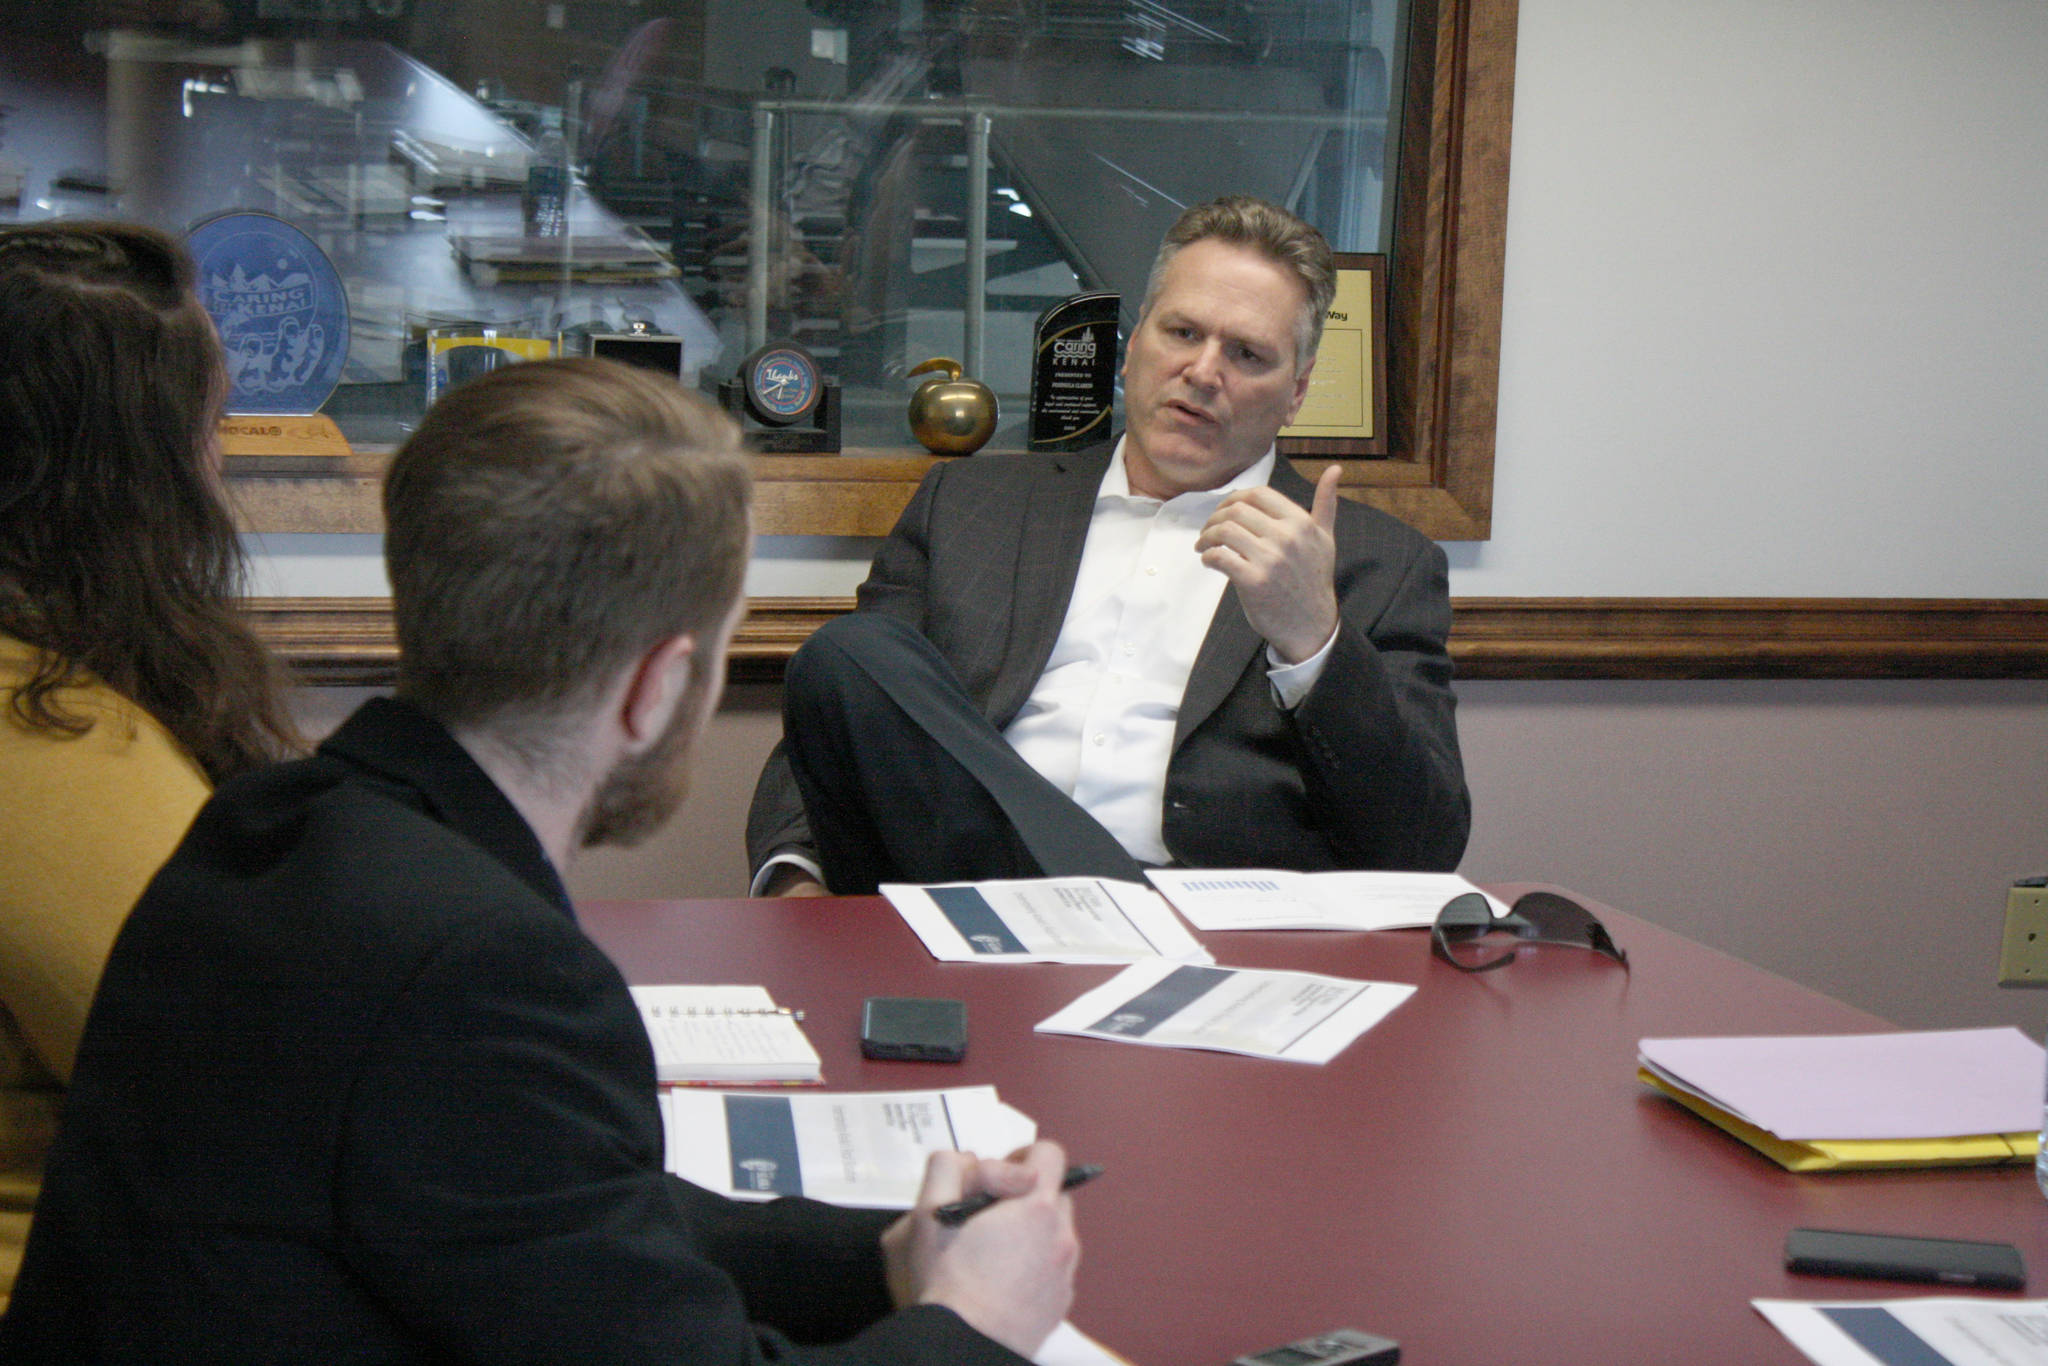 Gov. Mike Dunleavy speaks with Clarion reporters Brian Mazurek, left, and Victoria Petersen on Monday, March 25, 2019 in Kenai, Alaska. The governor answered questions on a wide range of topics, including public safety, education, industry and his proposed budget. (Photo by Erin Thompson/Peninsula Clarion)